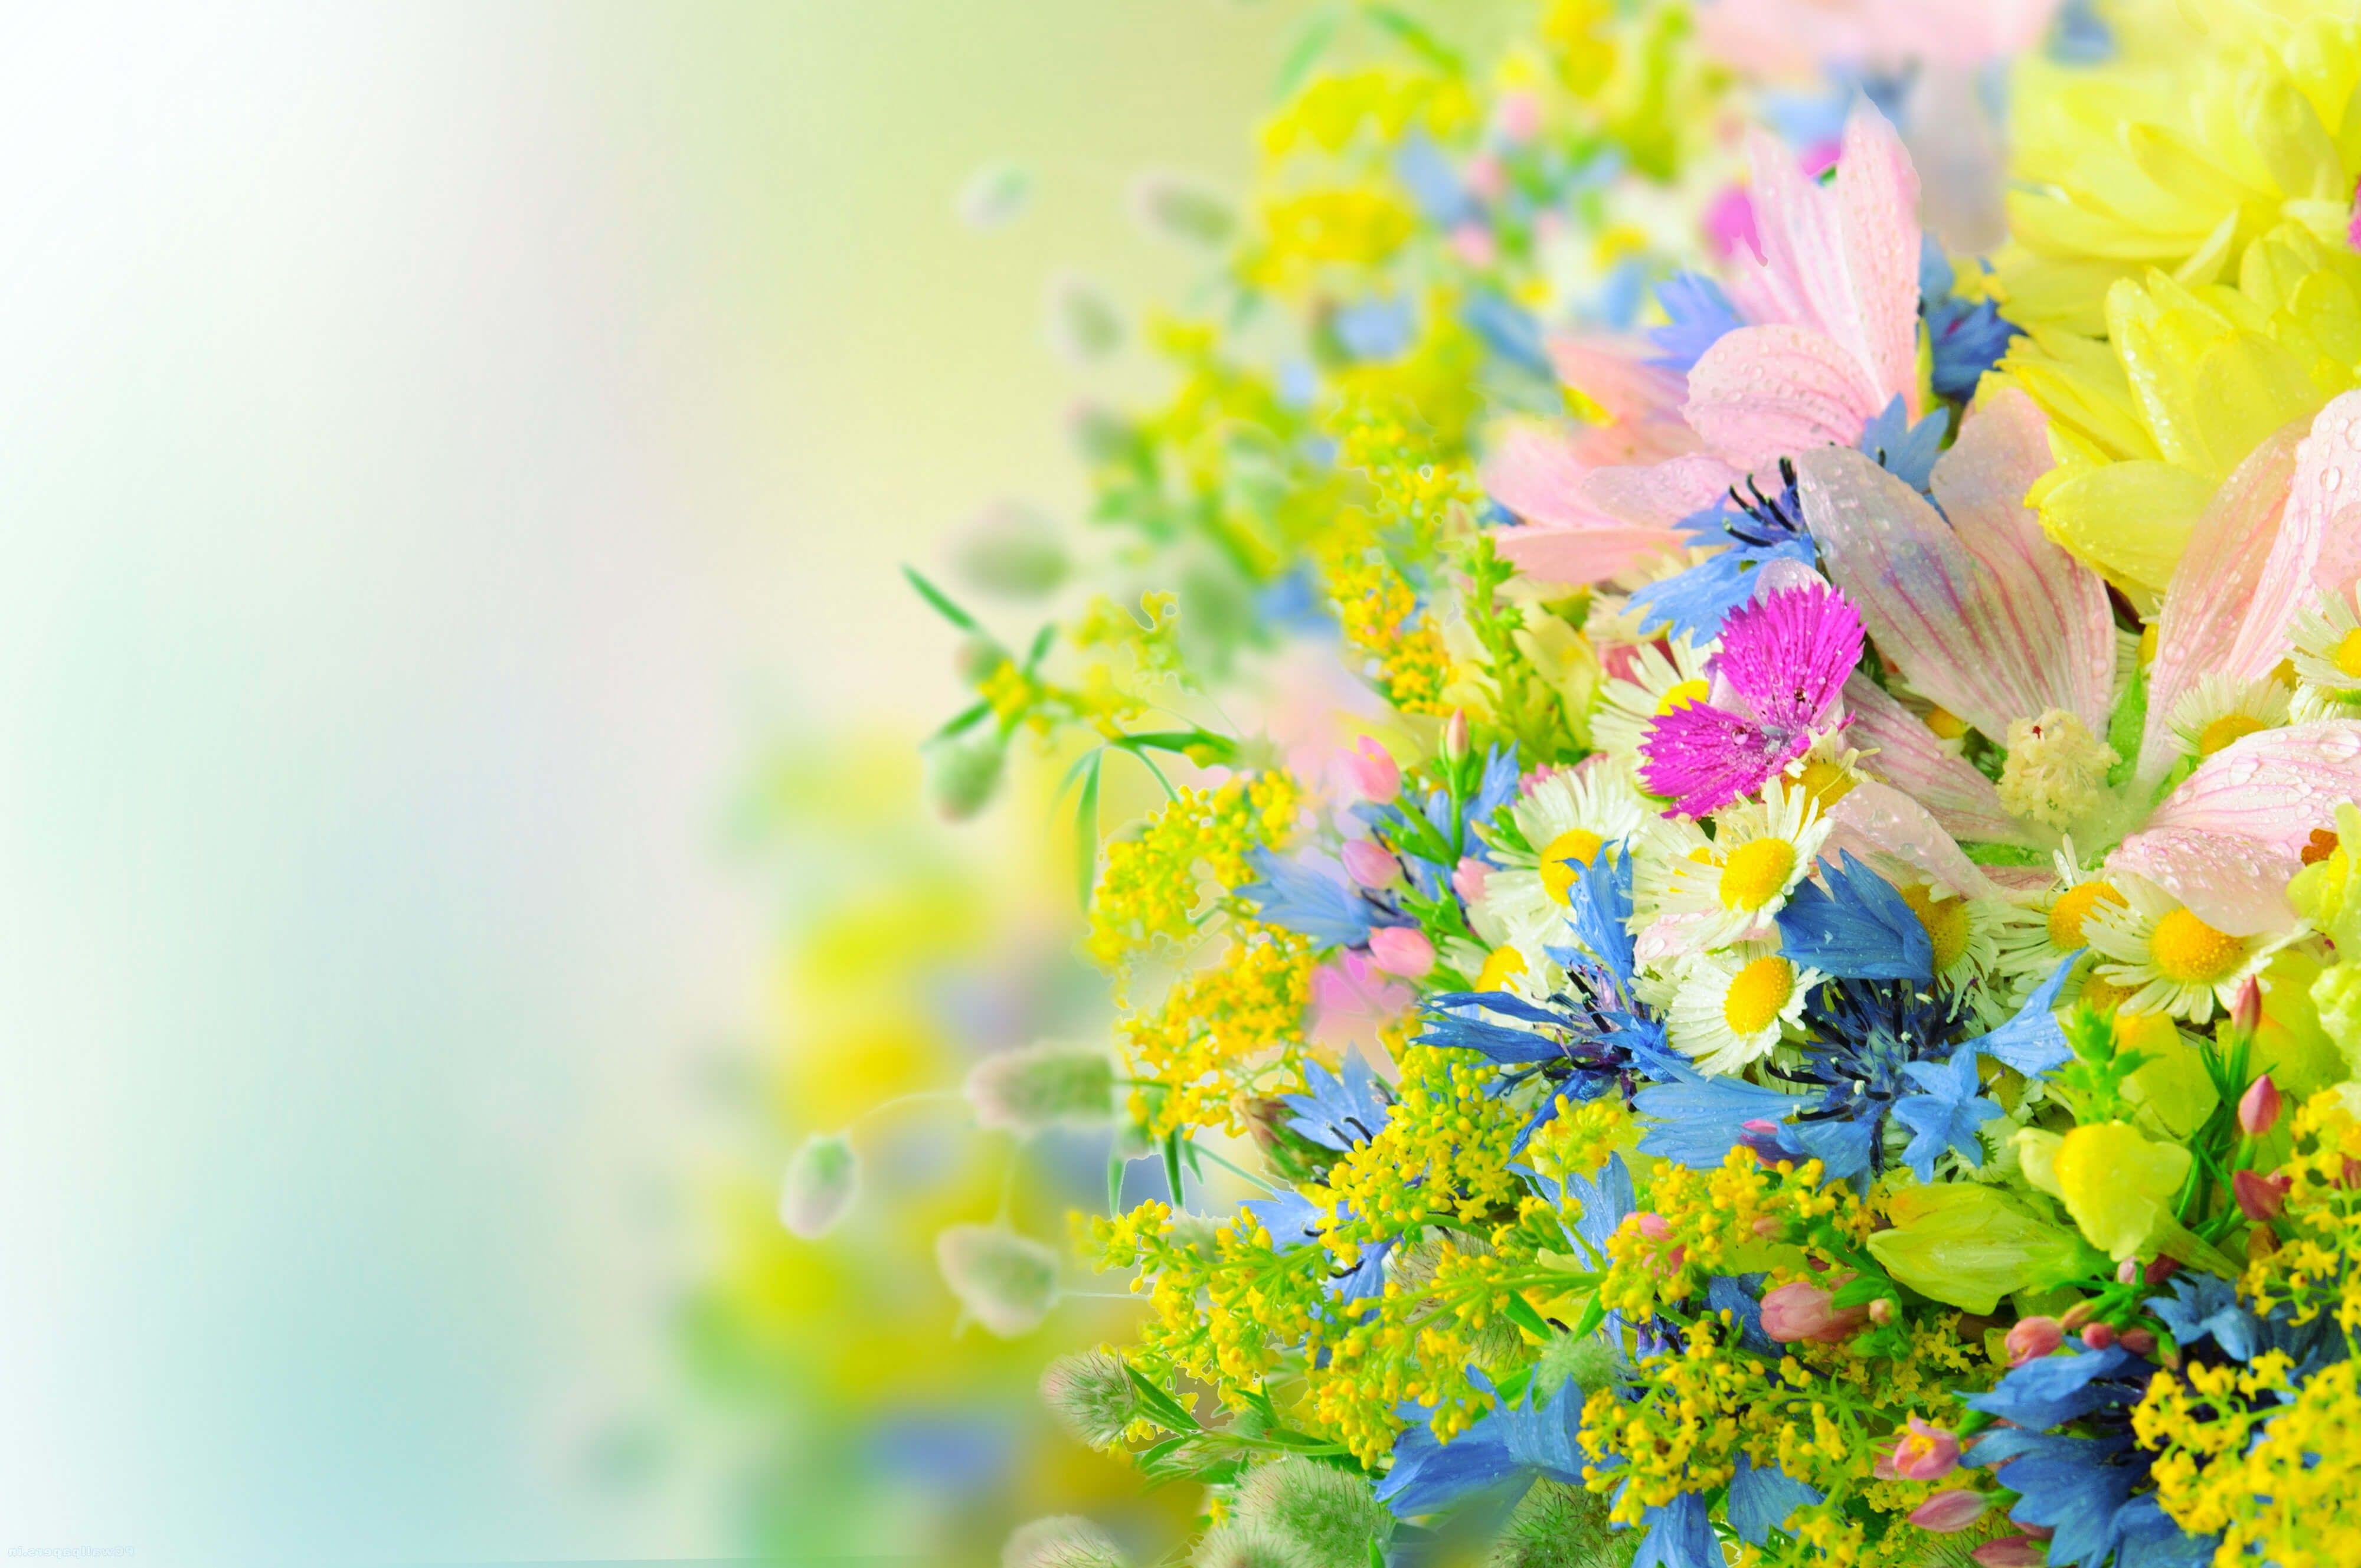 Bright Flowers Wallpapers